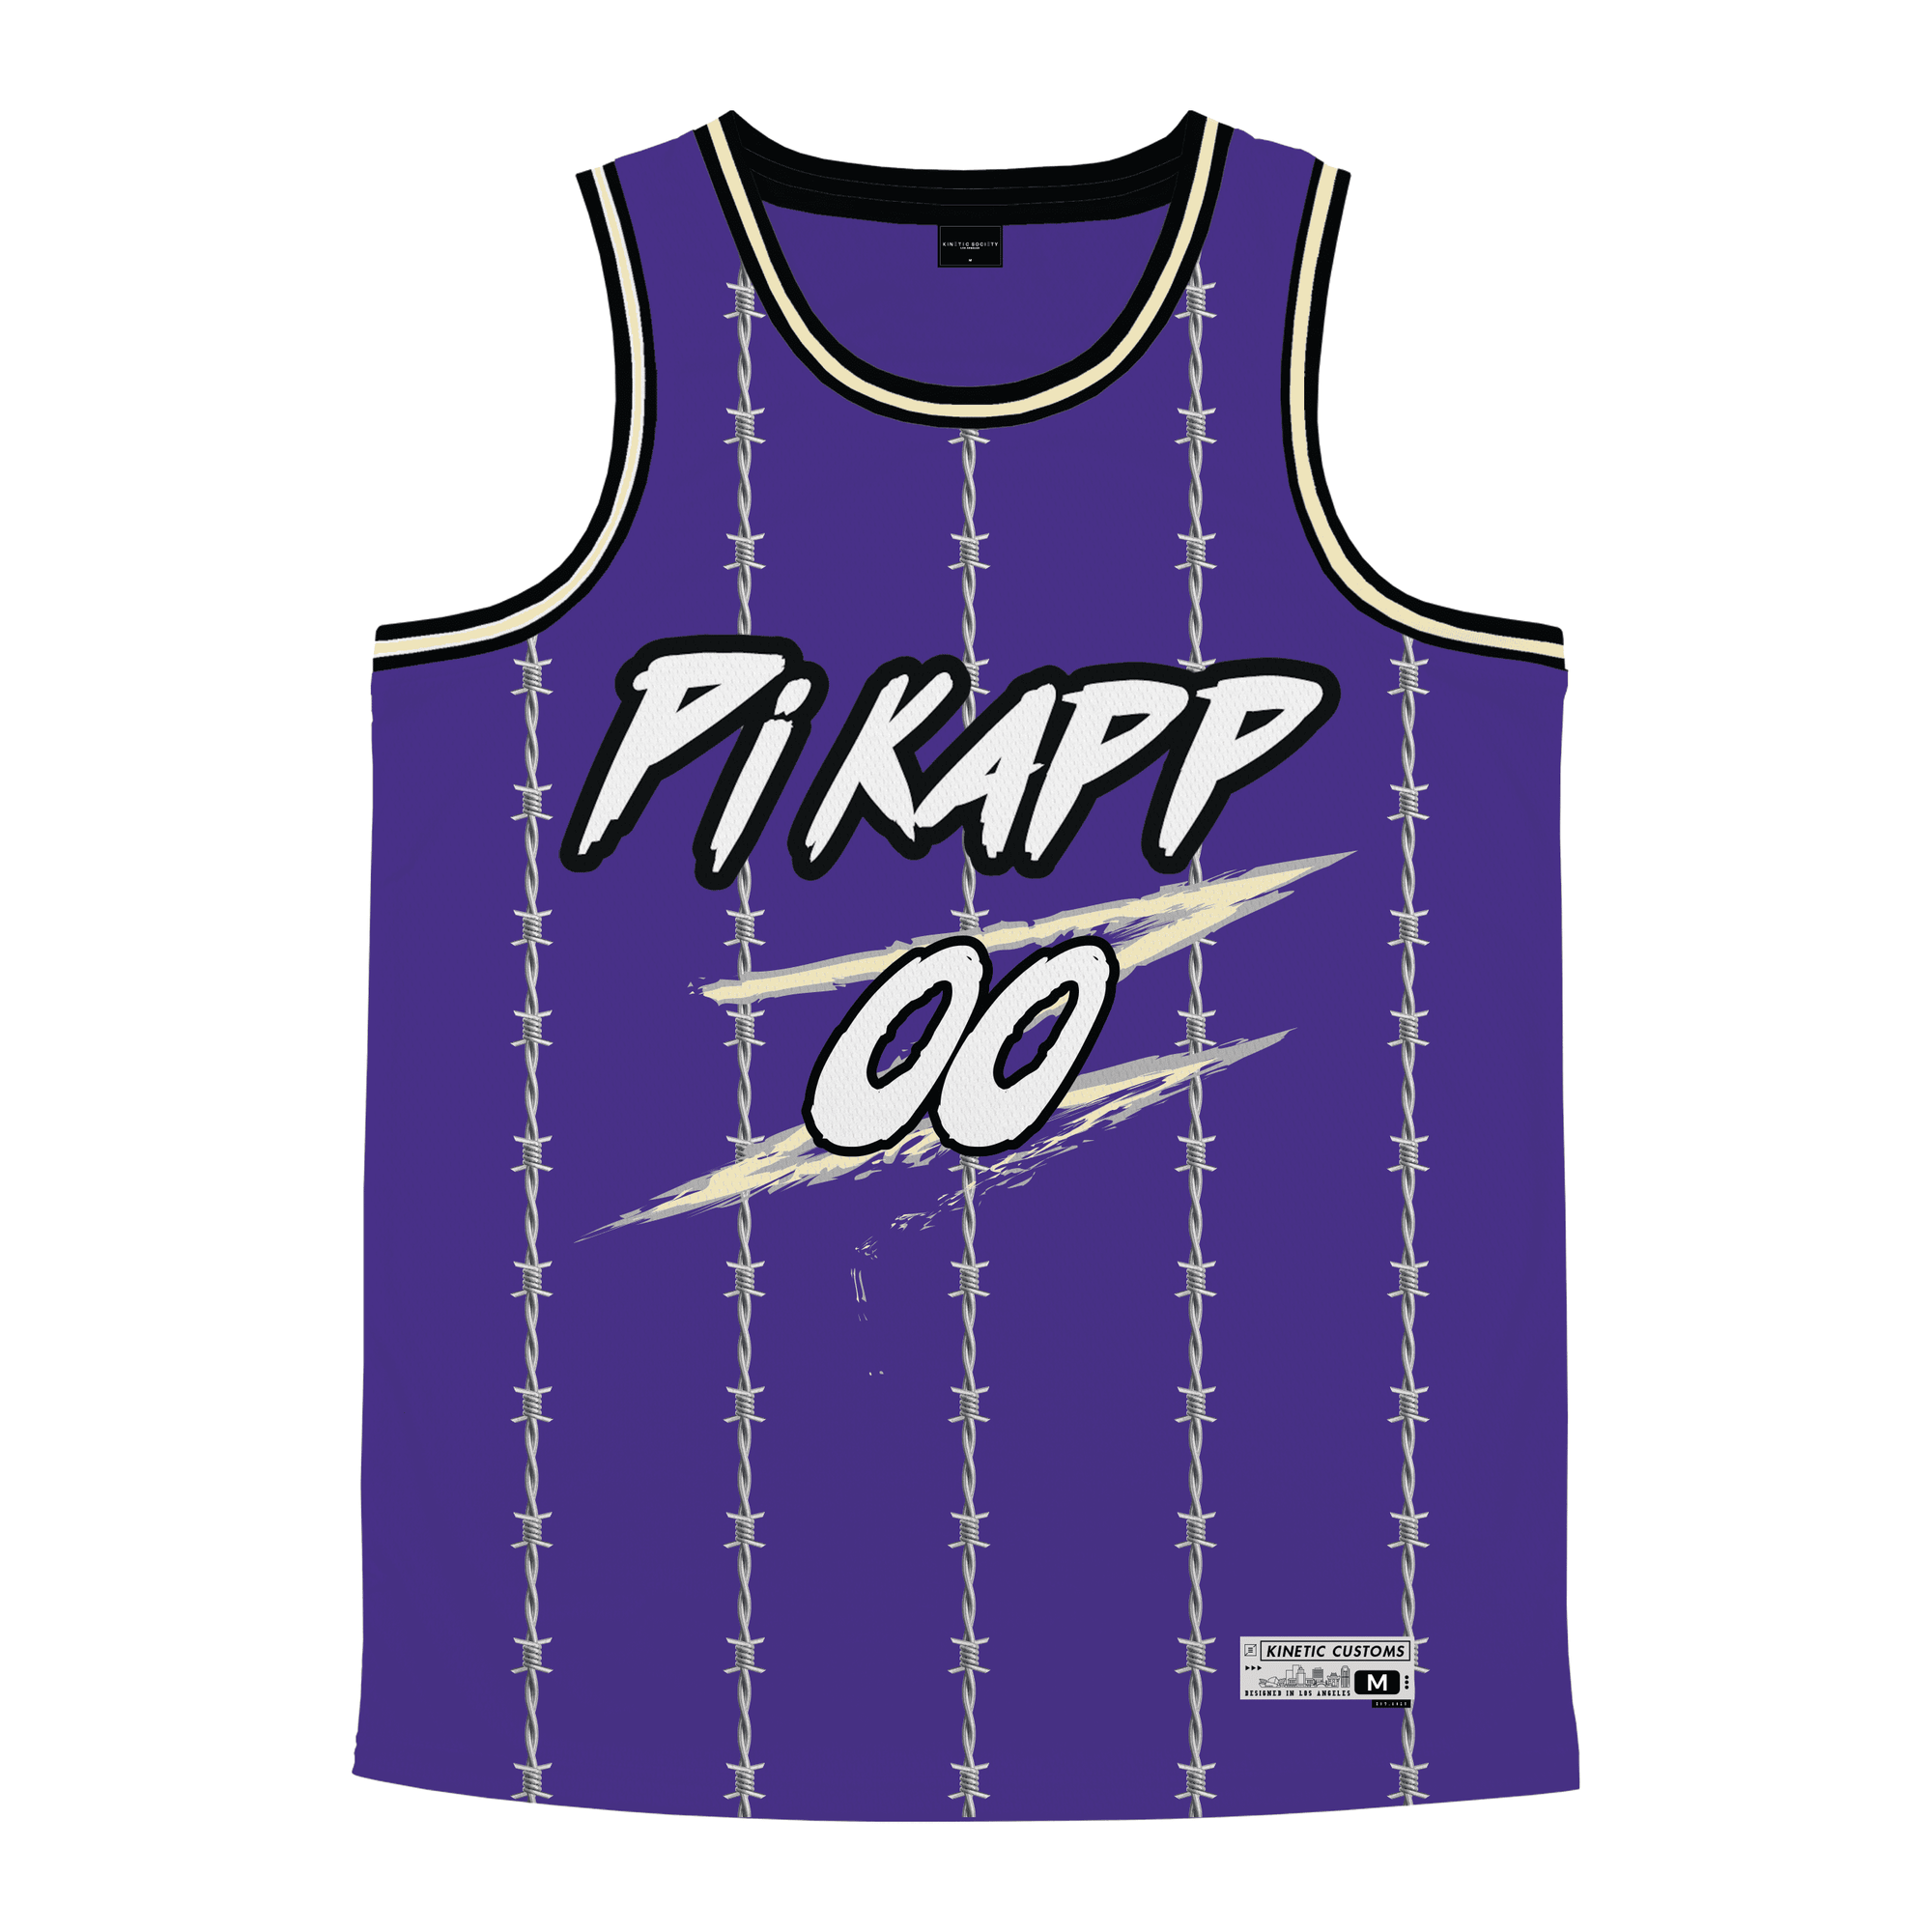 Pi Kappa Phi - Barbed Wire Basketball Jersey